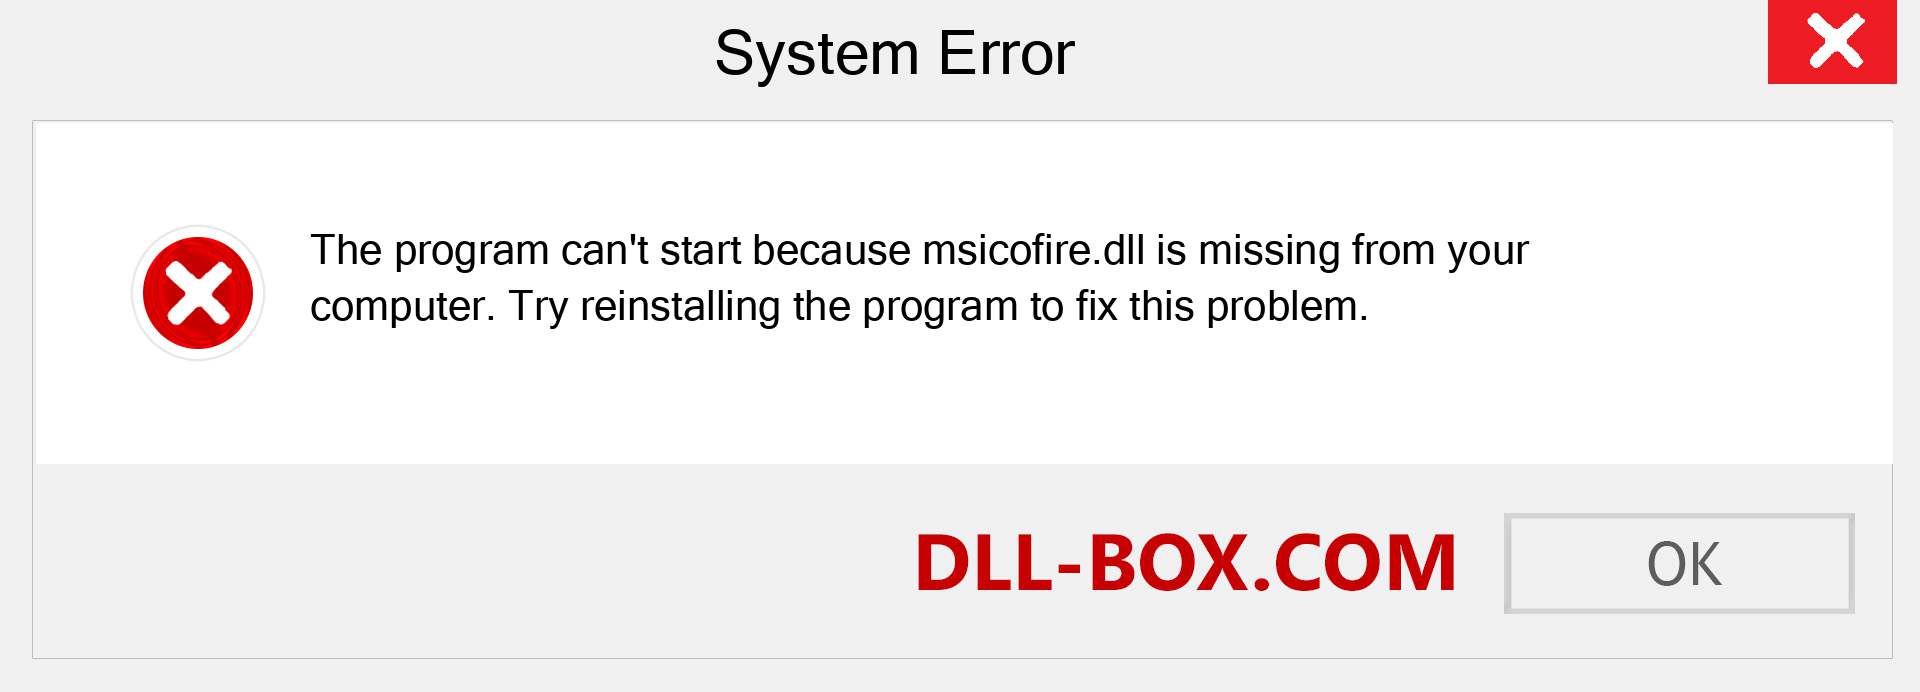  msicofire.dll file is missing?. Download for Windows 7, 8, 10 - Fix  msicofire dll Missing Error on Windows, photos, images